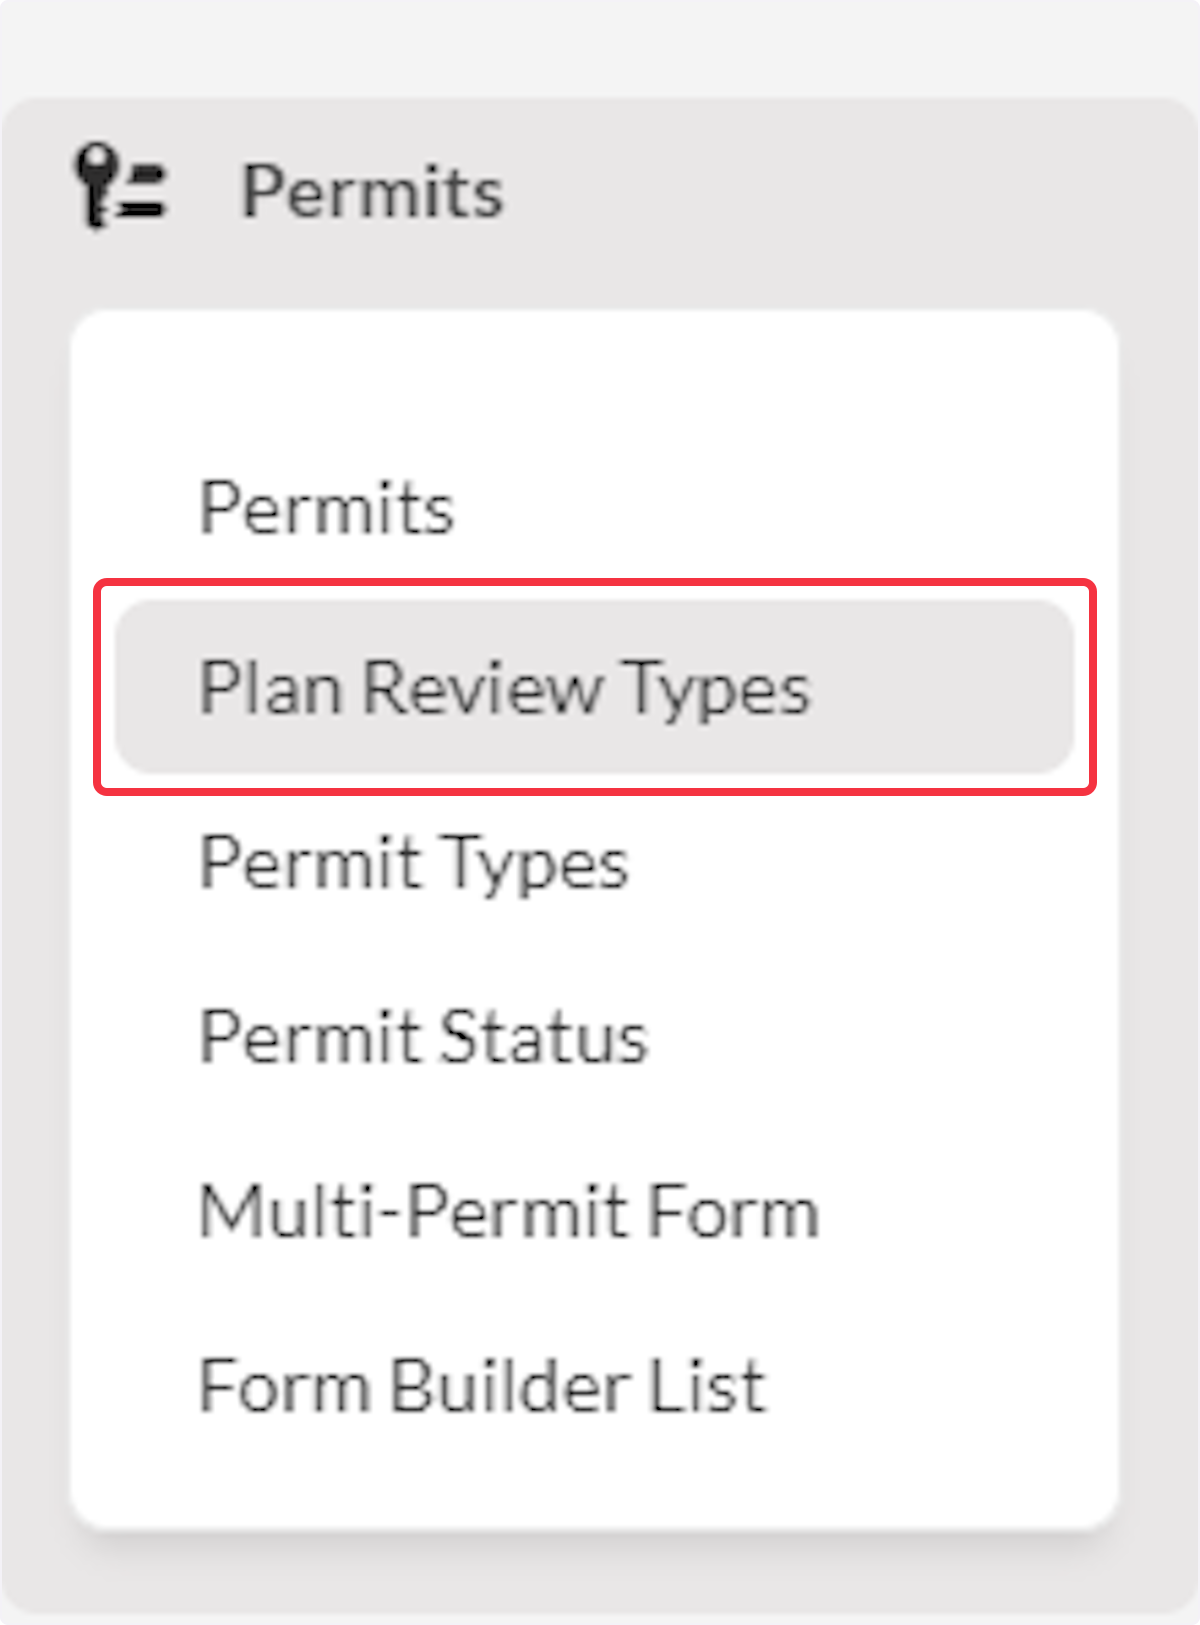 Click on Plan Review Types.